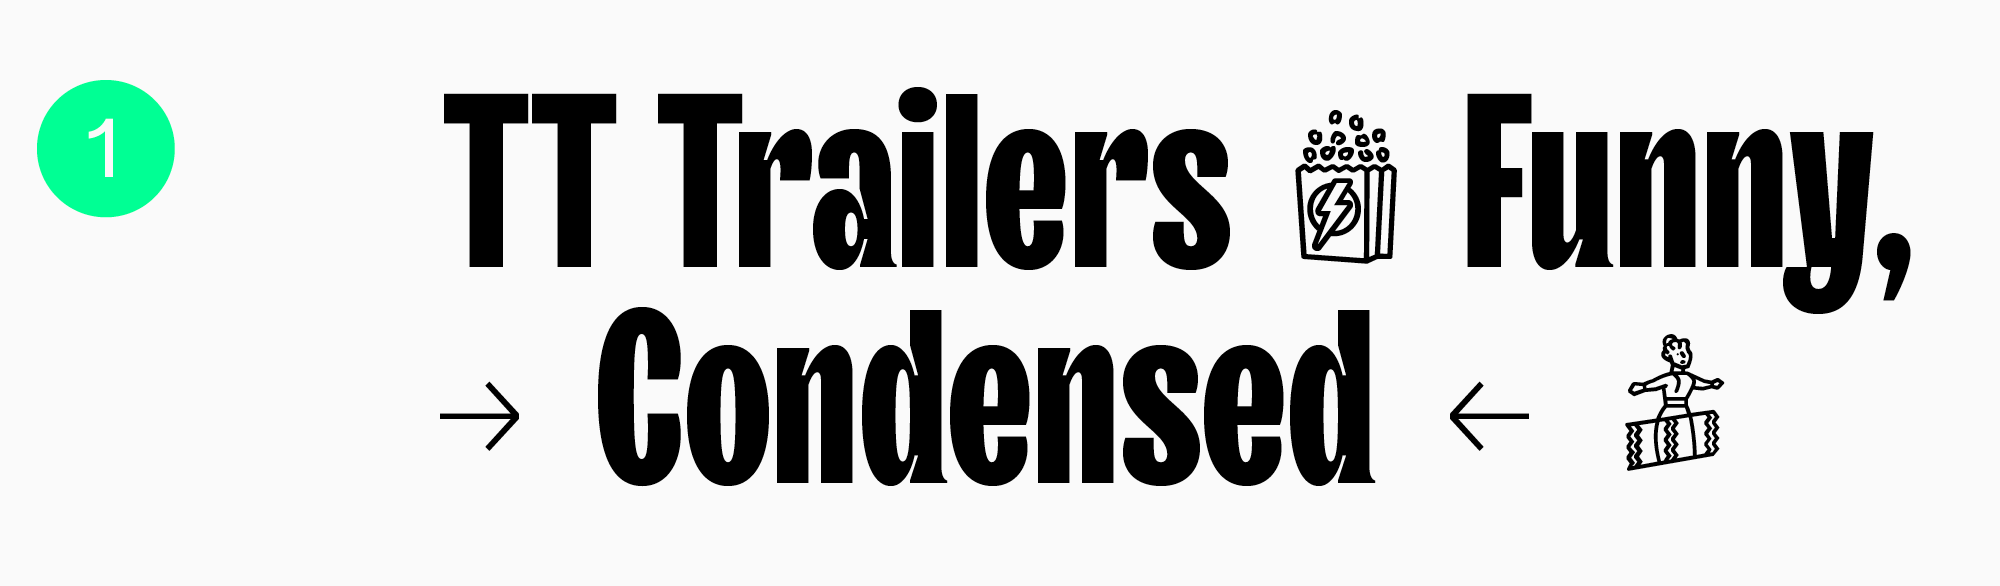 Fun font for video games TT Trailers